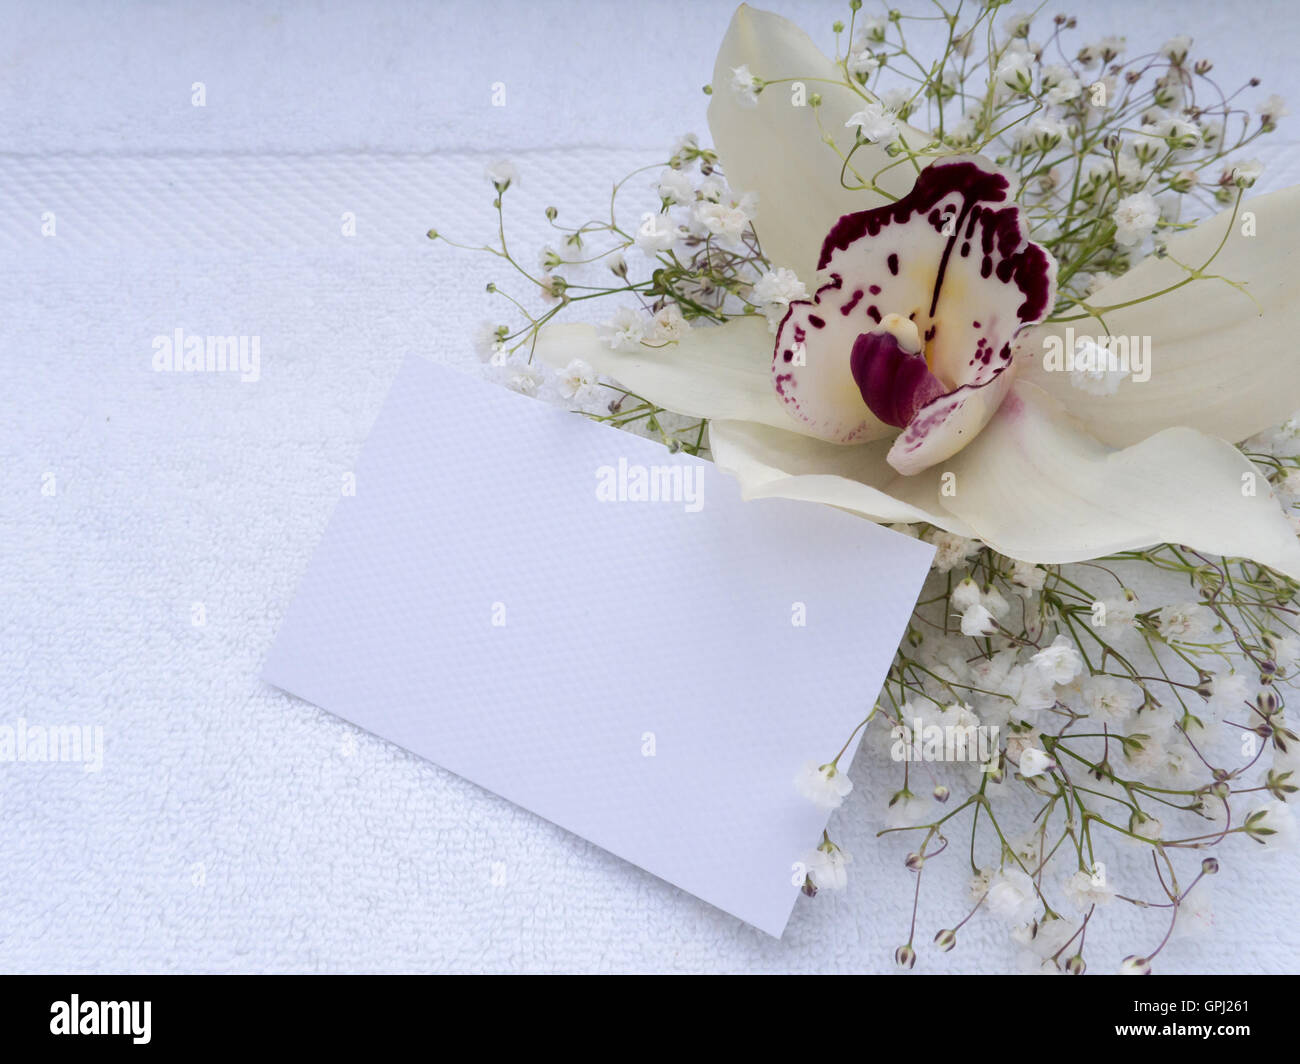 White orchid flower, with sprinkles of violet and invitation or greeting card on the white terry towel Stock Photo